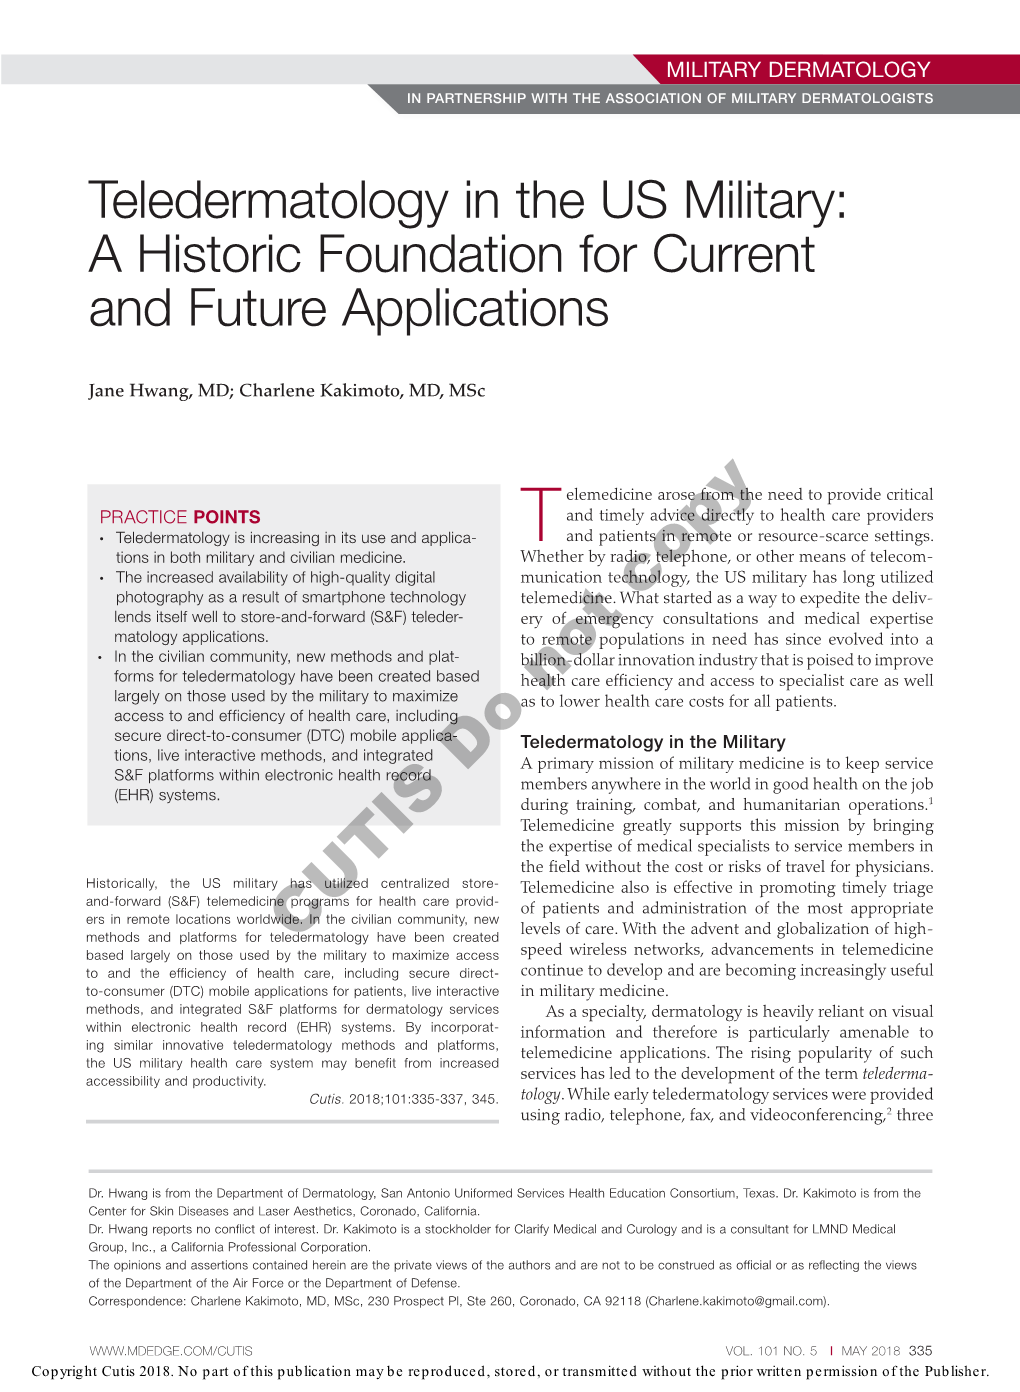 Teledermatology in the US Military: a Historic Foundation for Current and Future Applications